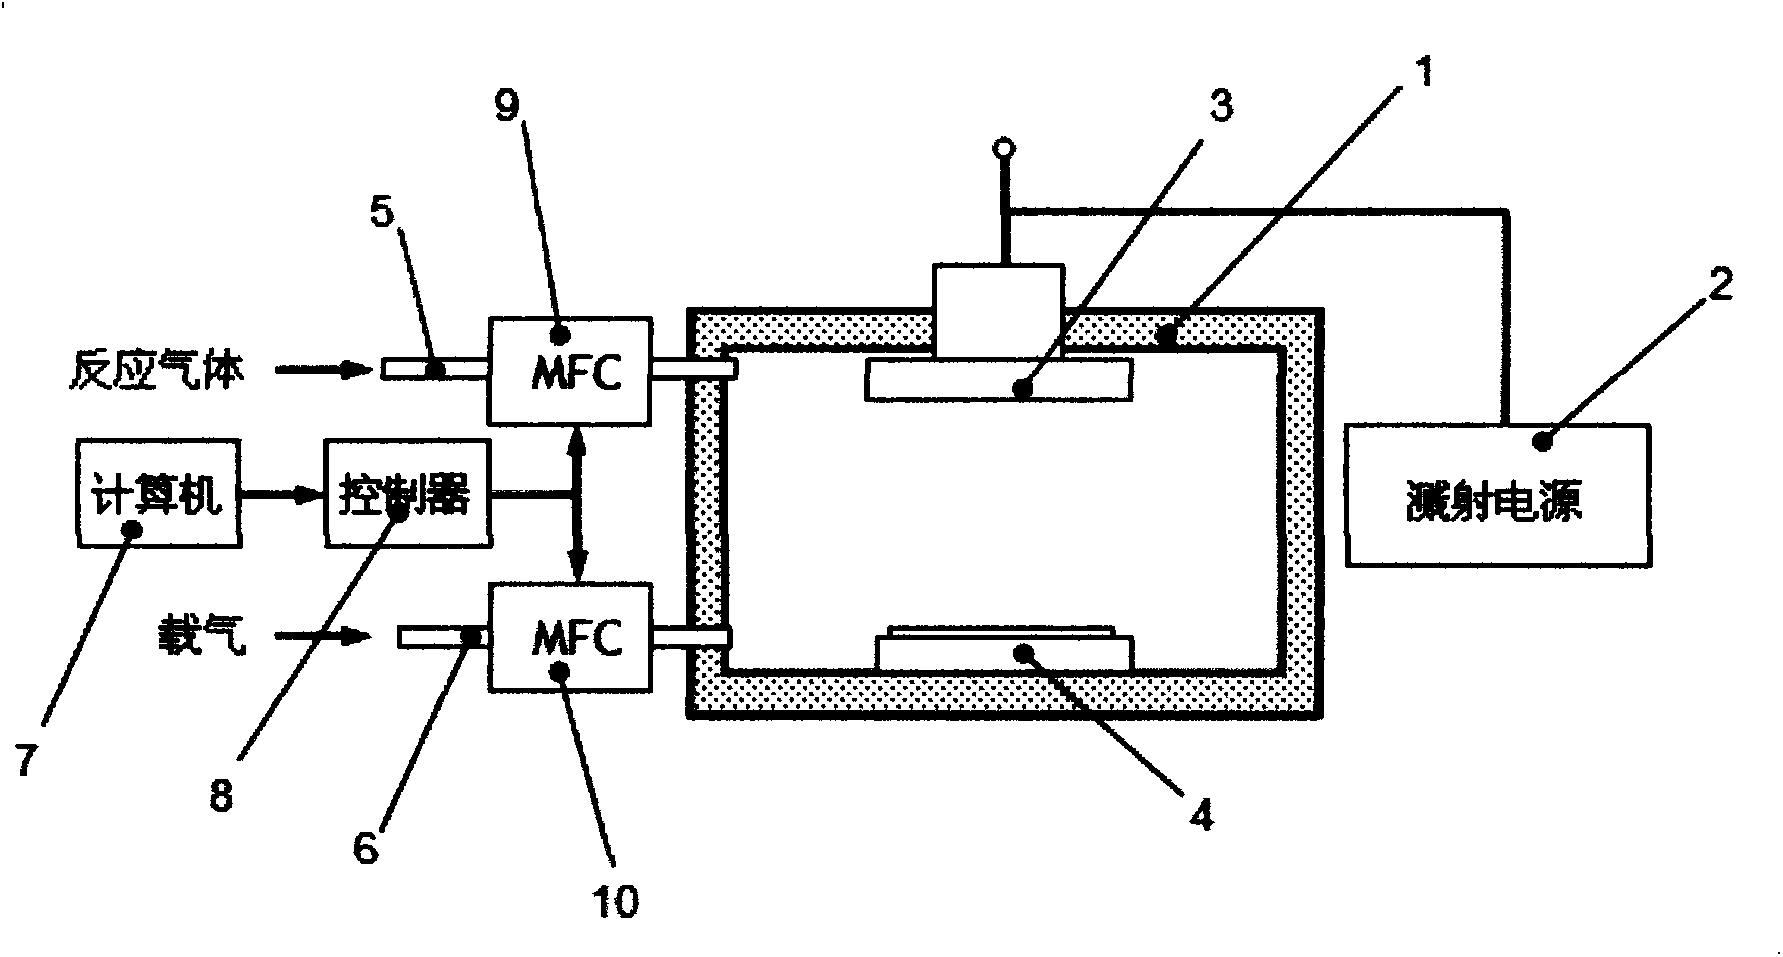 Reaction sputtering system based on oscillation-type reaction gas control